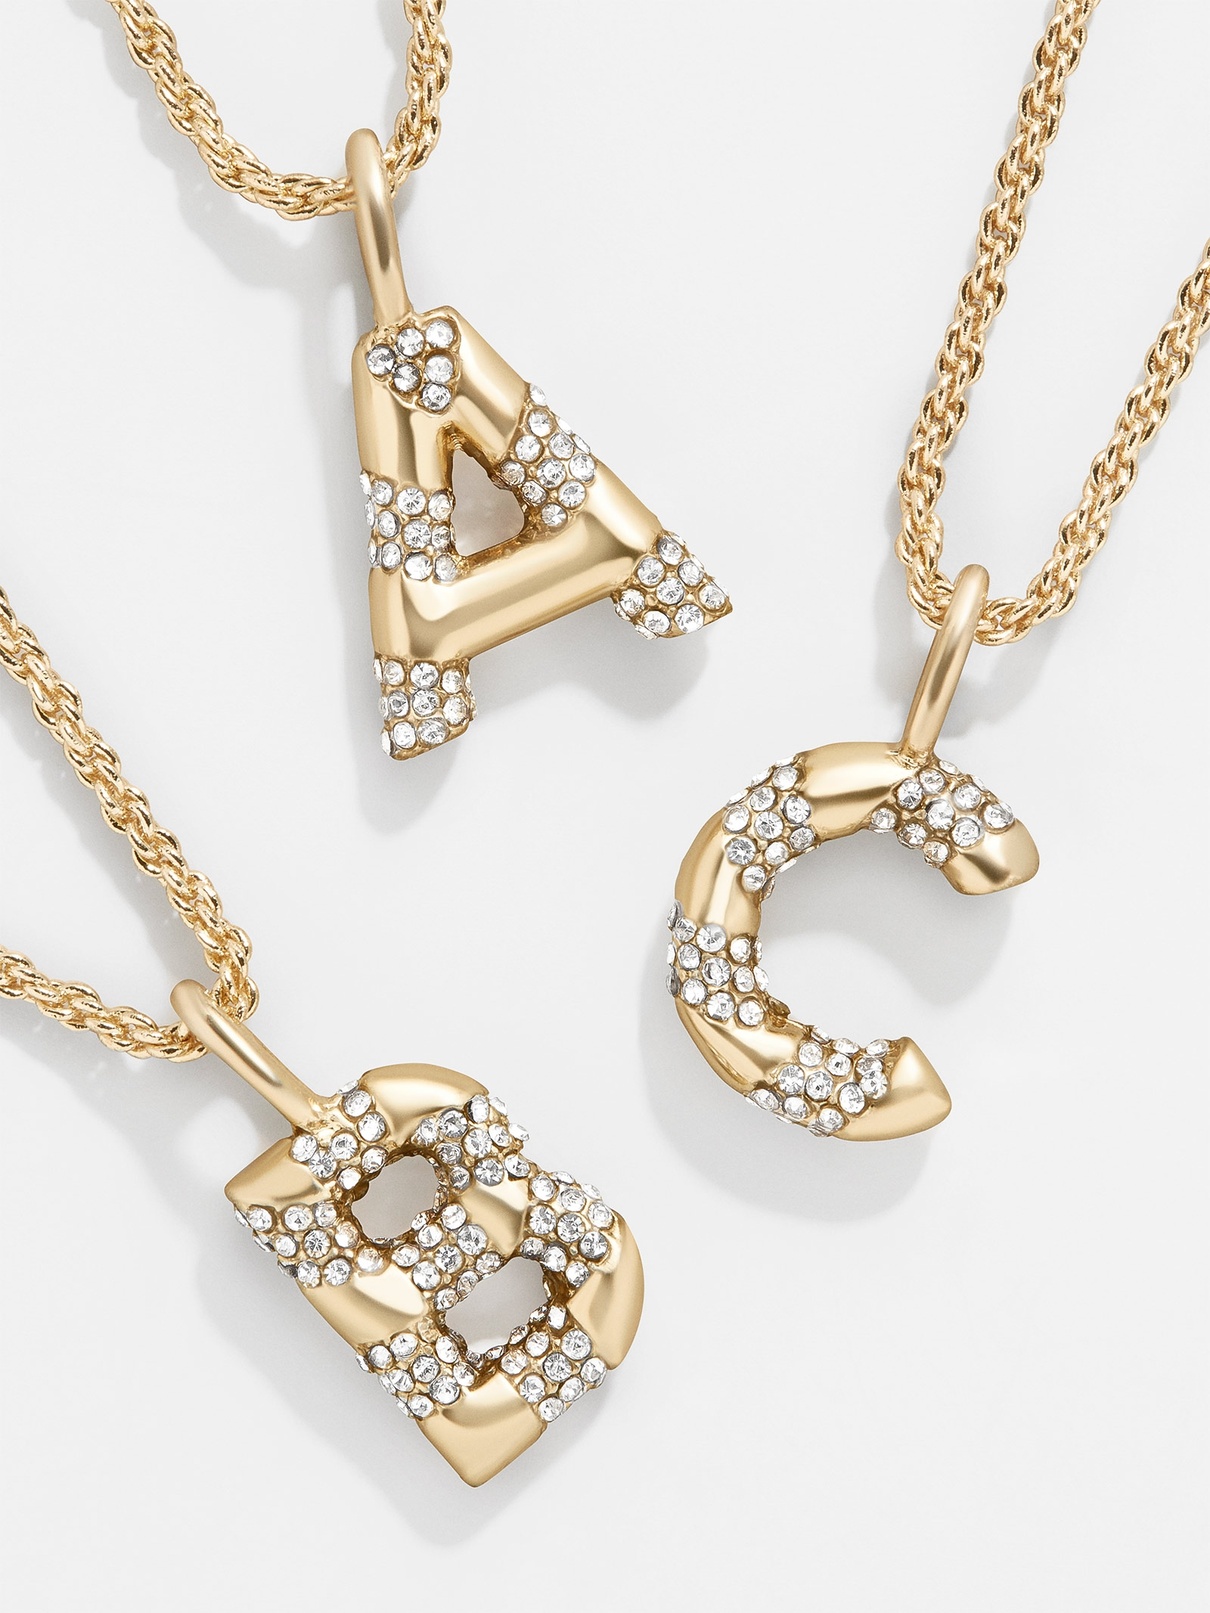 baublebar initial necklace